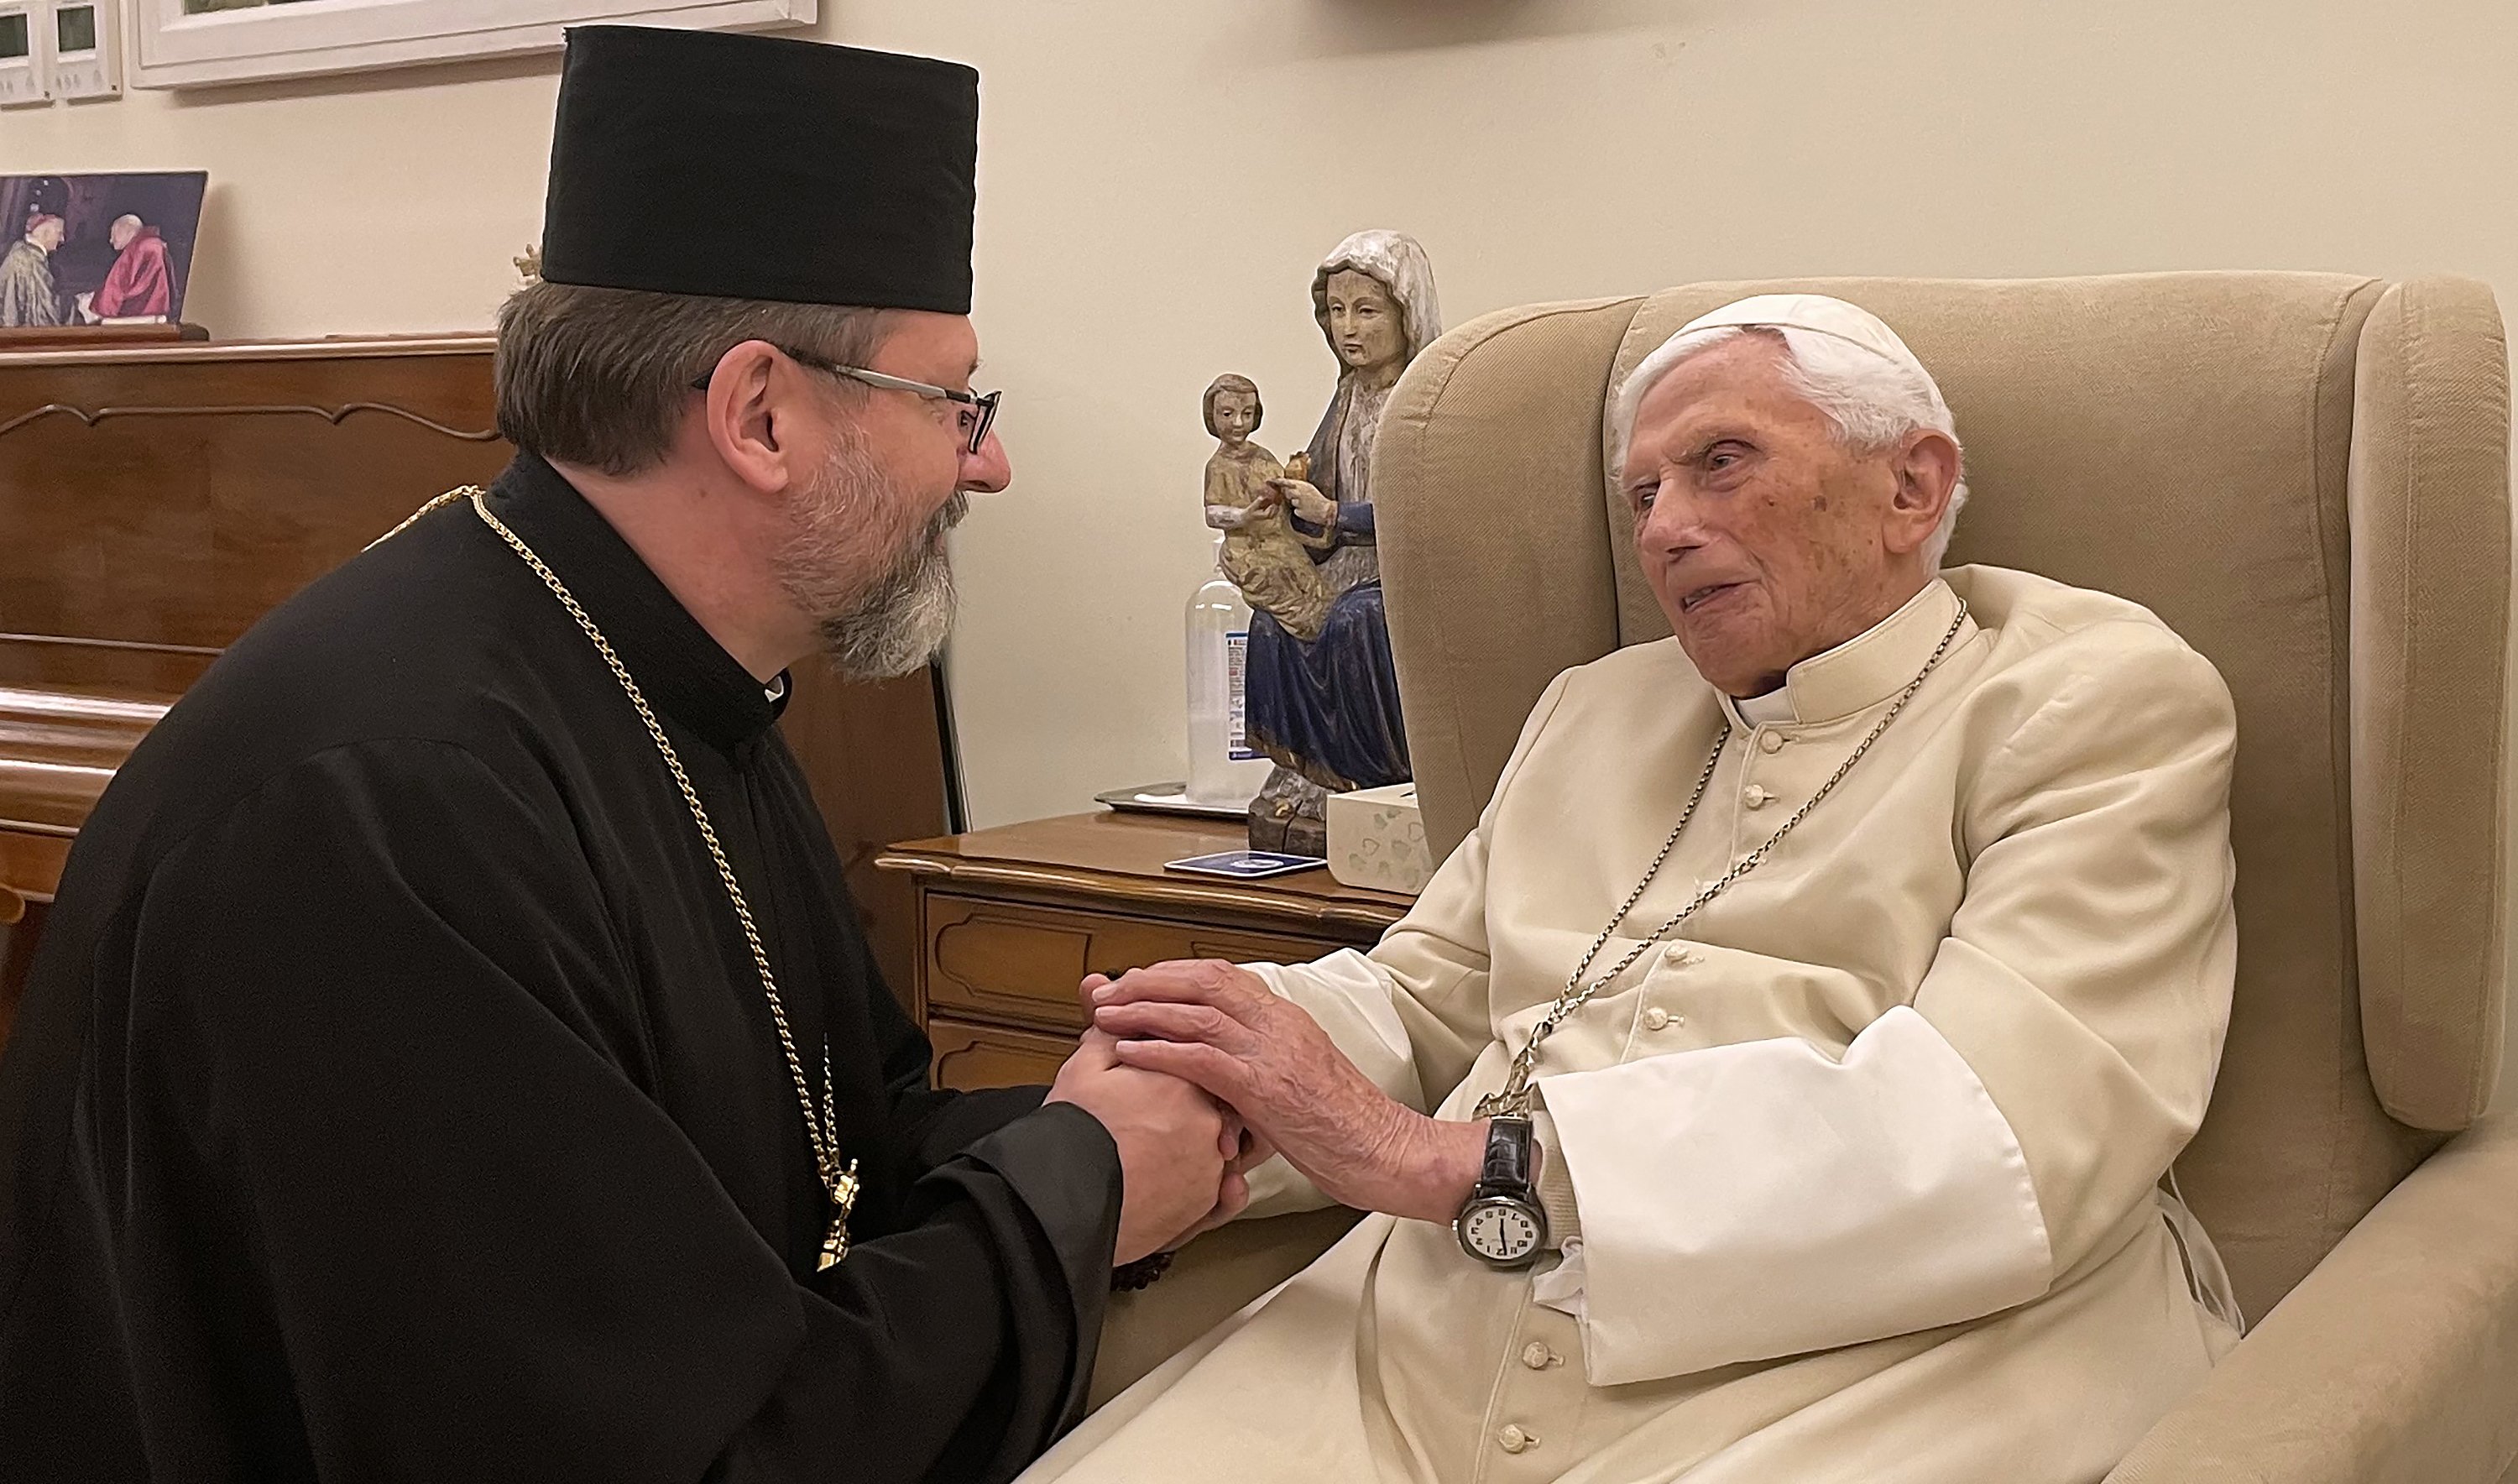 Ukrainian Archbishop Sviatoslav Shevchuk of Kyiv-Halych visits Nov. 9, 2022, with retired Pope Benedict XVI in the retired pope's residence, the Mater Ecclesia monastery in the Vatican Gardens. (CNS photo/courtesy Archbishop's Secretariat in Rome)